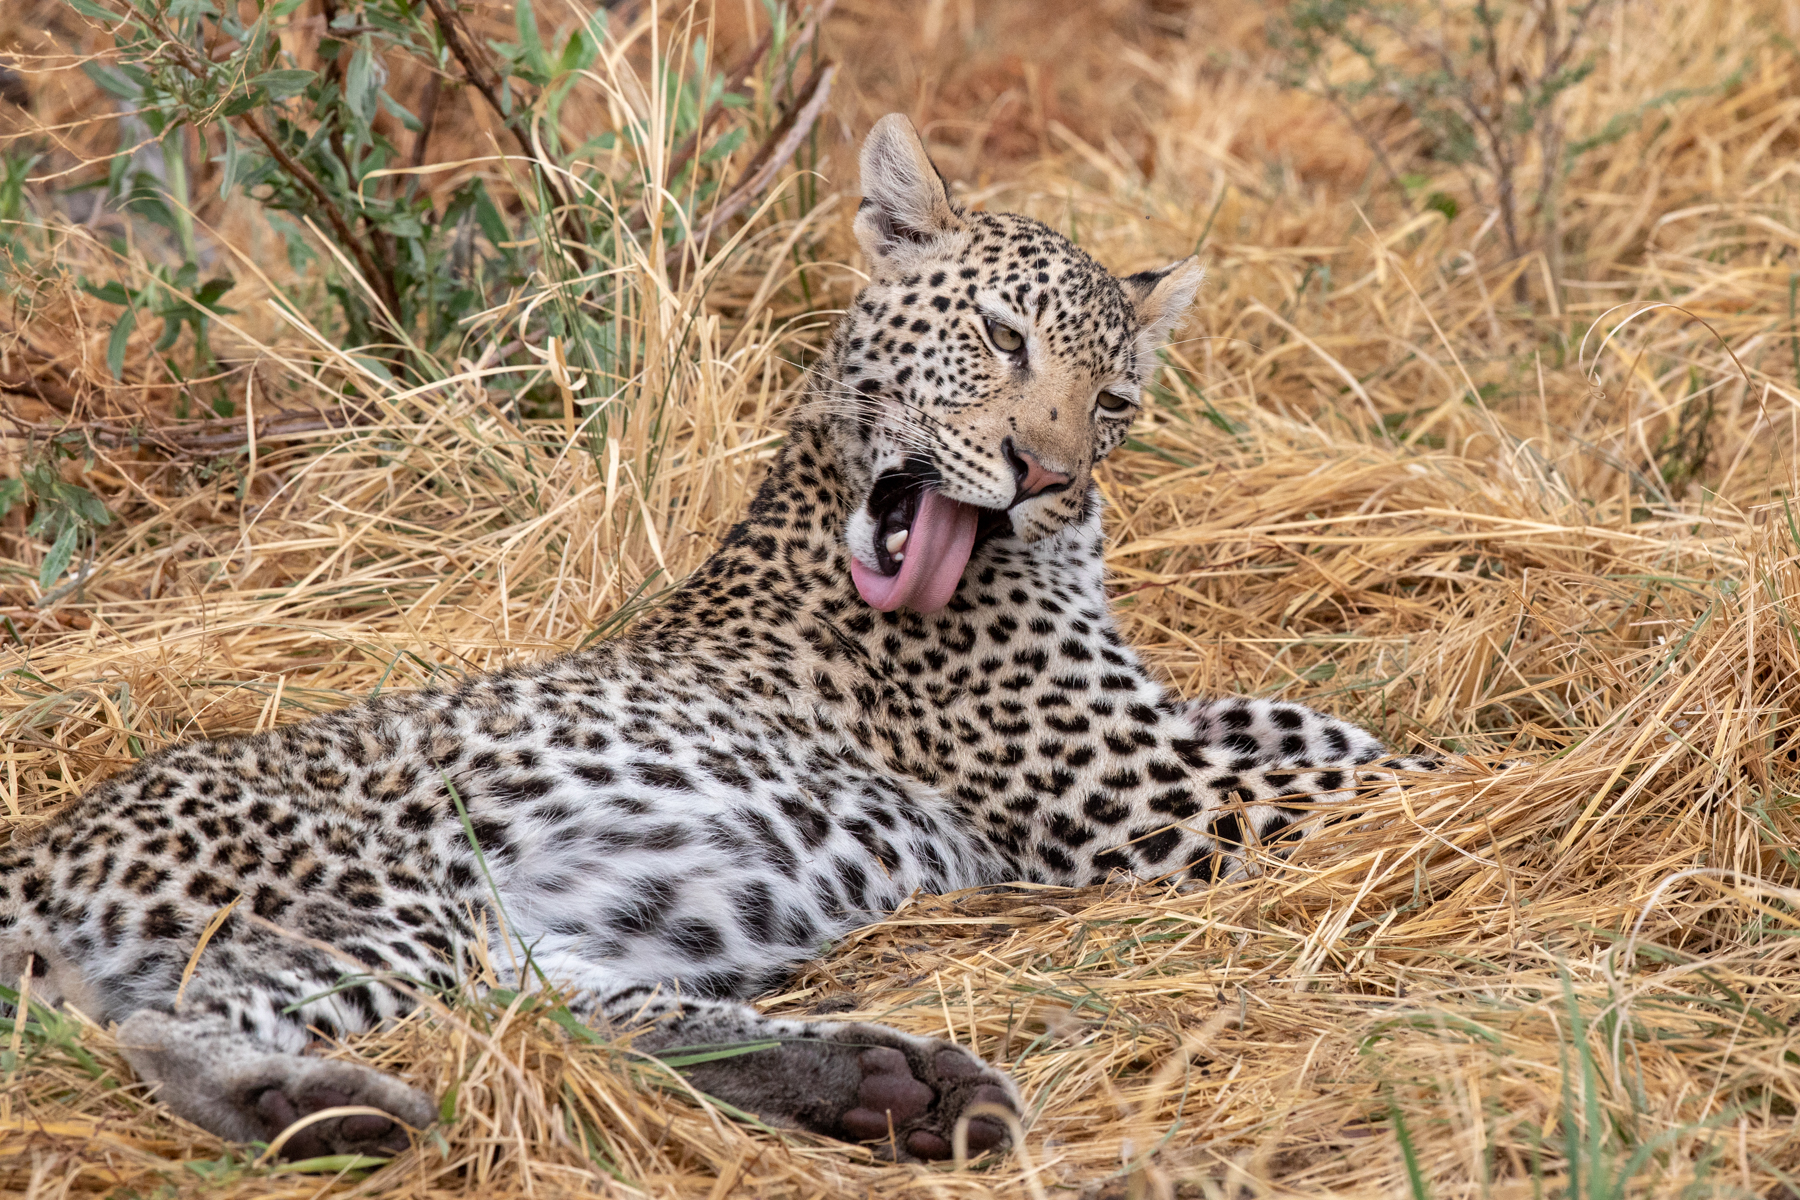 Cats, even large ones, are clean creatures. A Leopard grooms itself after its siesta